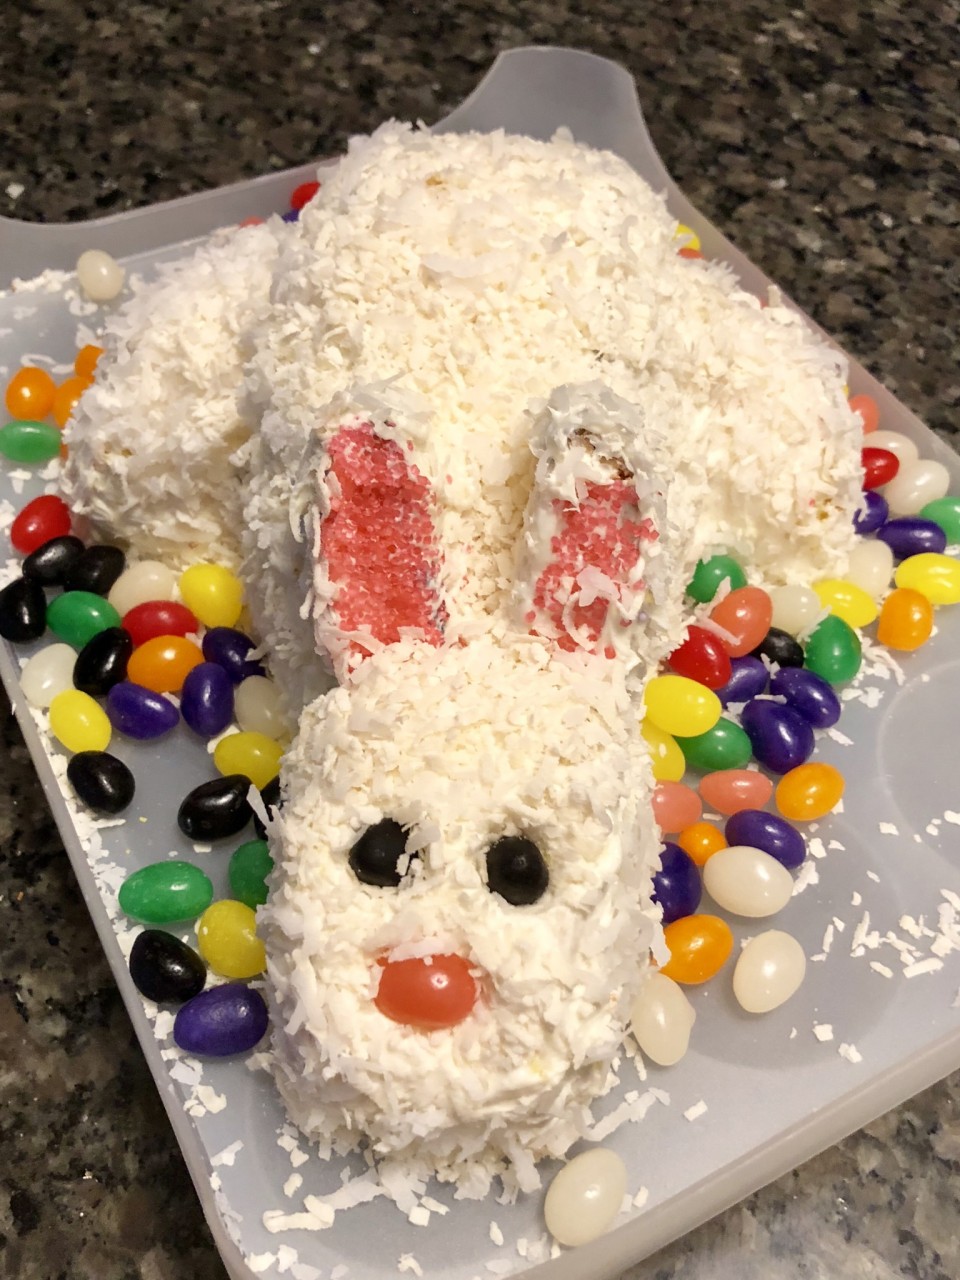 Bunny cake - a tradition from my husband’s childhood that we continue for our little boys.